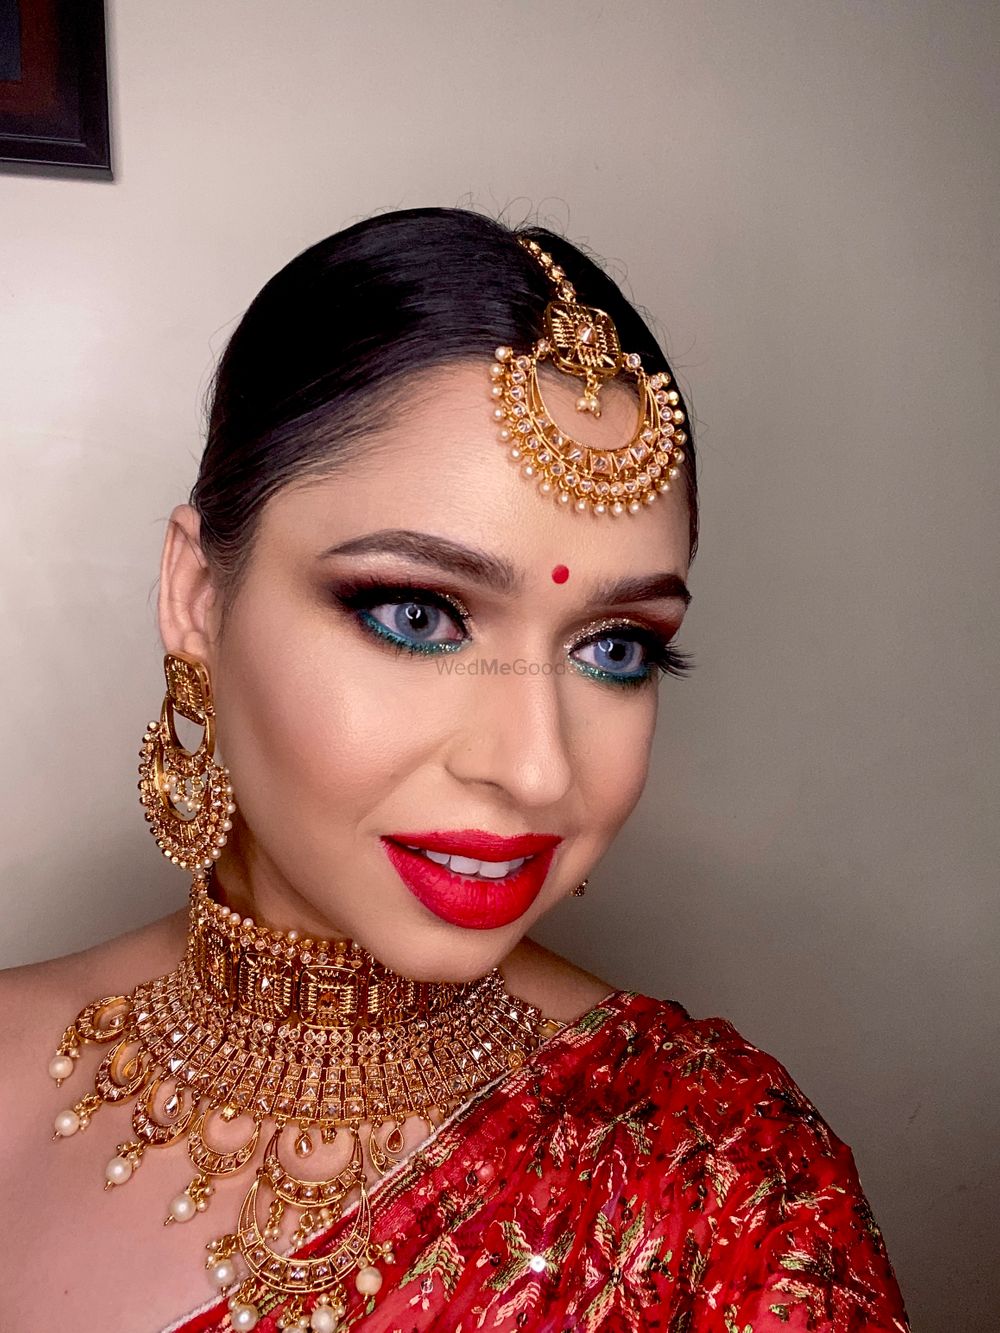 Photo From Brides by Yamini - By YAMINI’S Makeup and Beyond